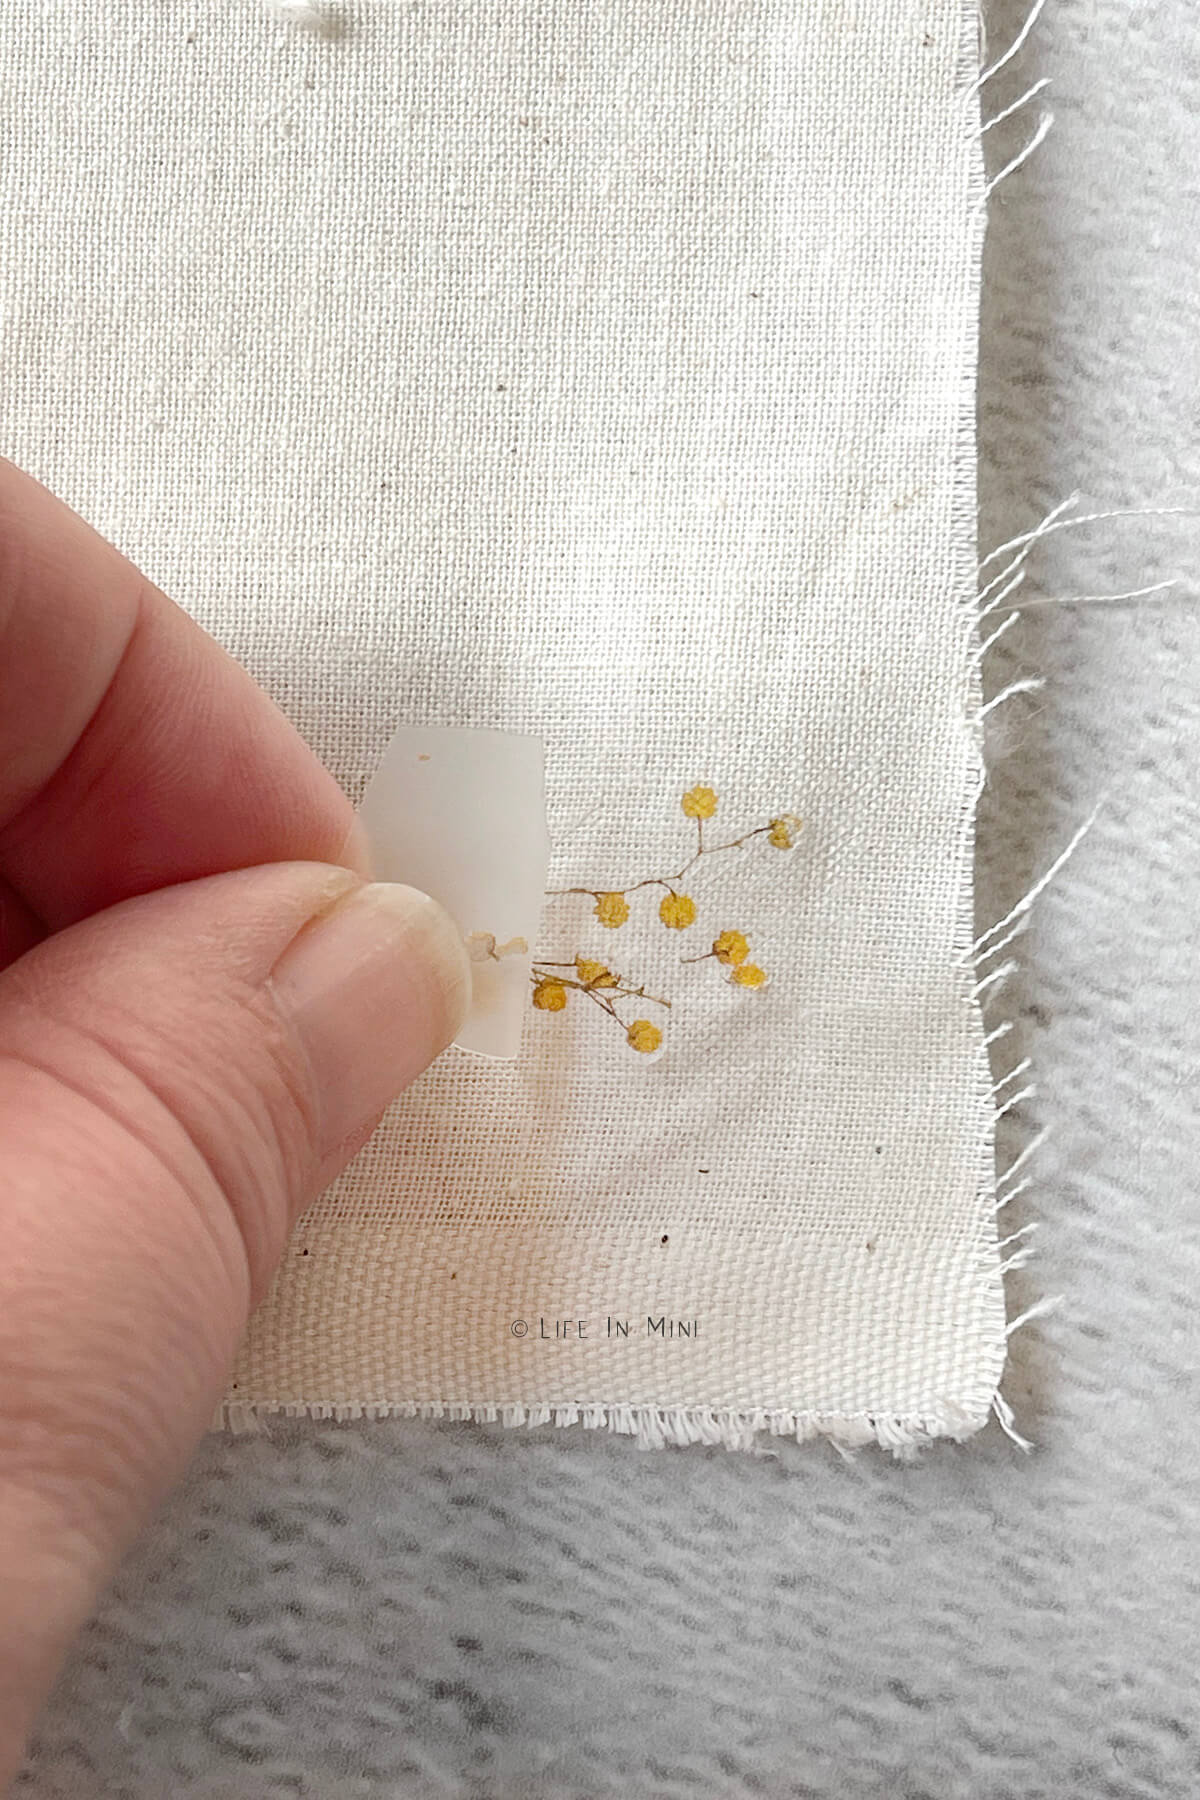 Peeling off the backing from a flower rub off transfer